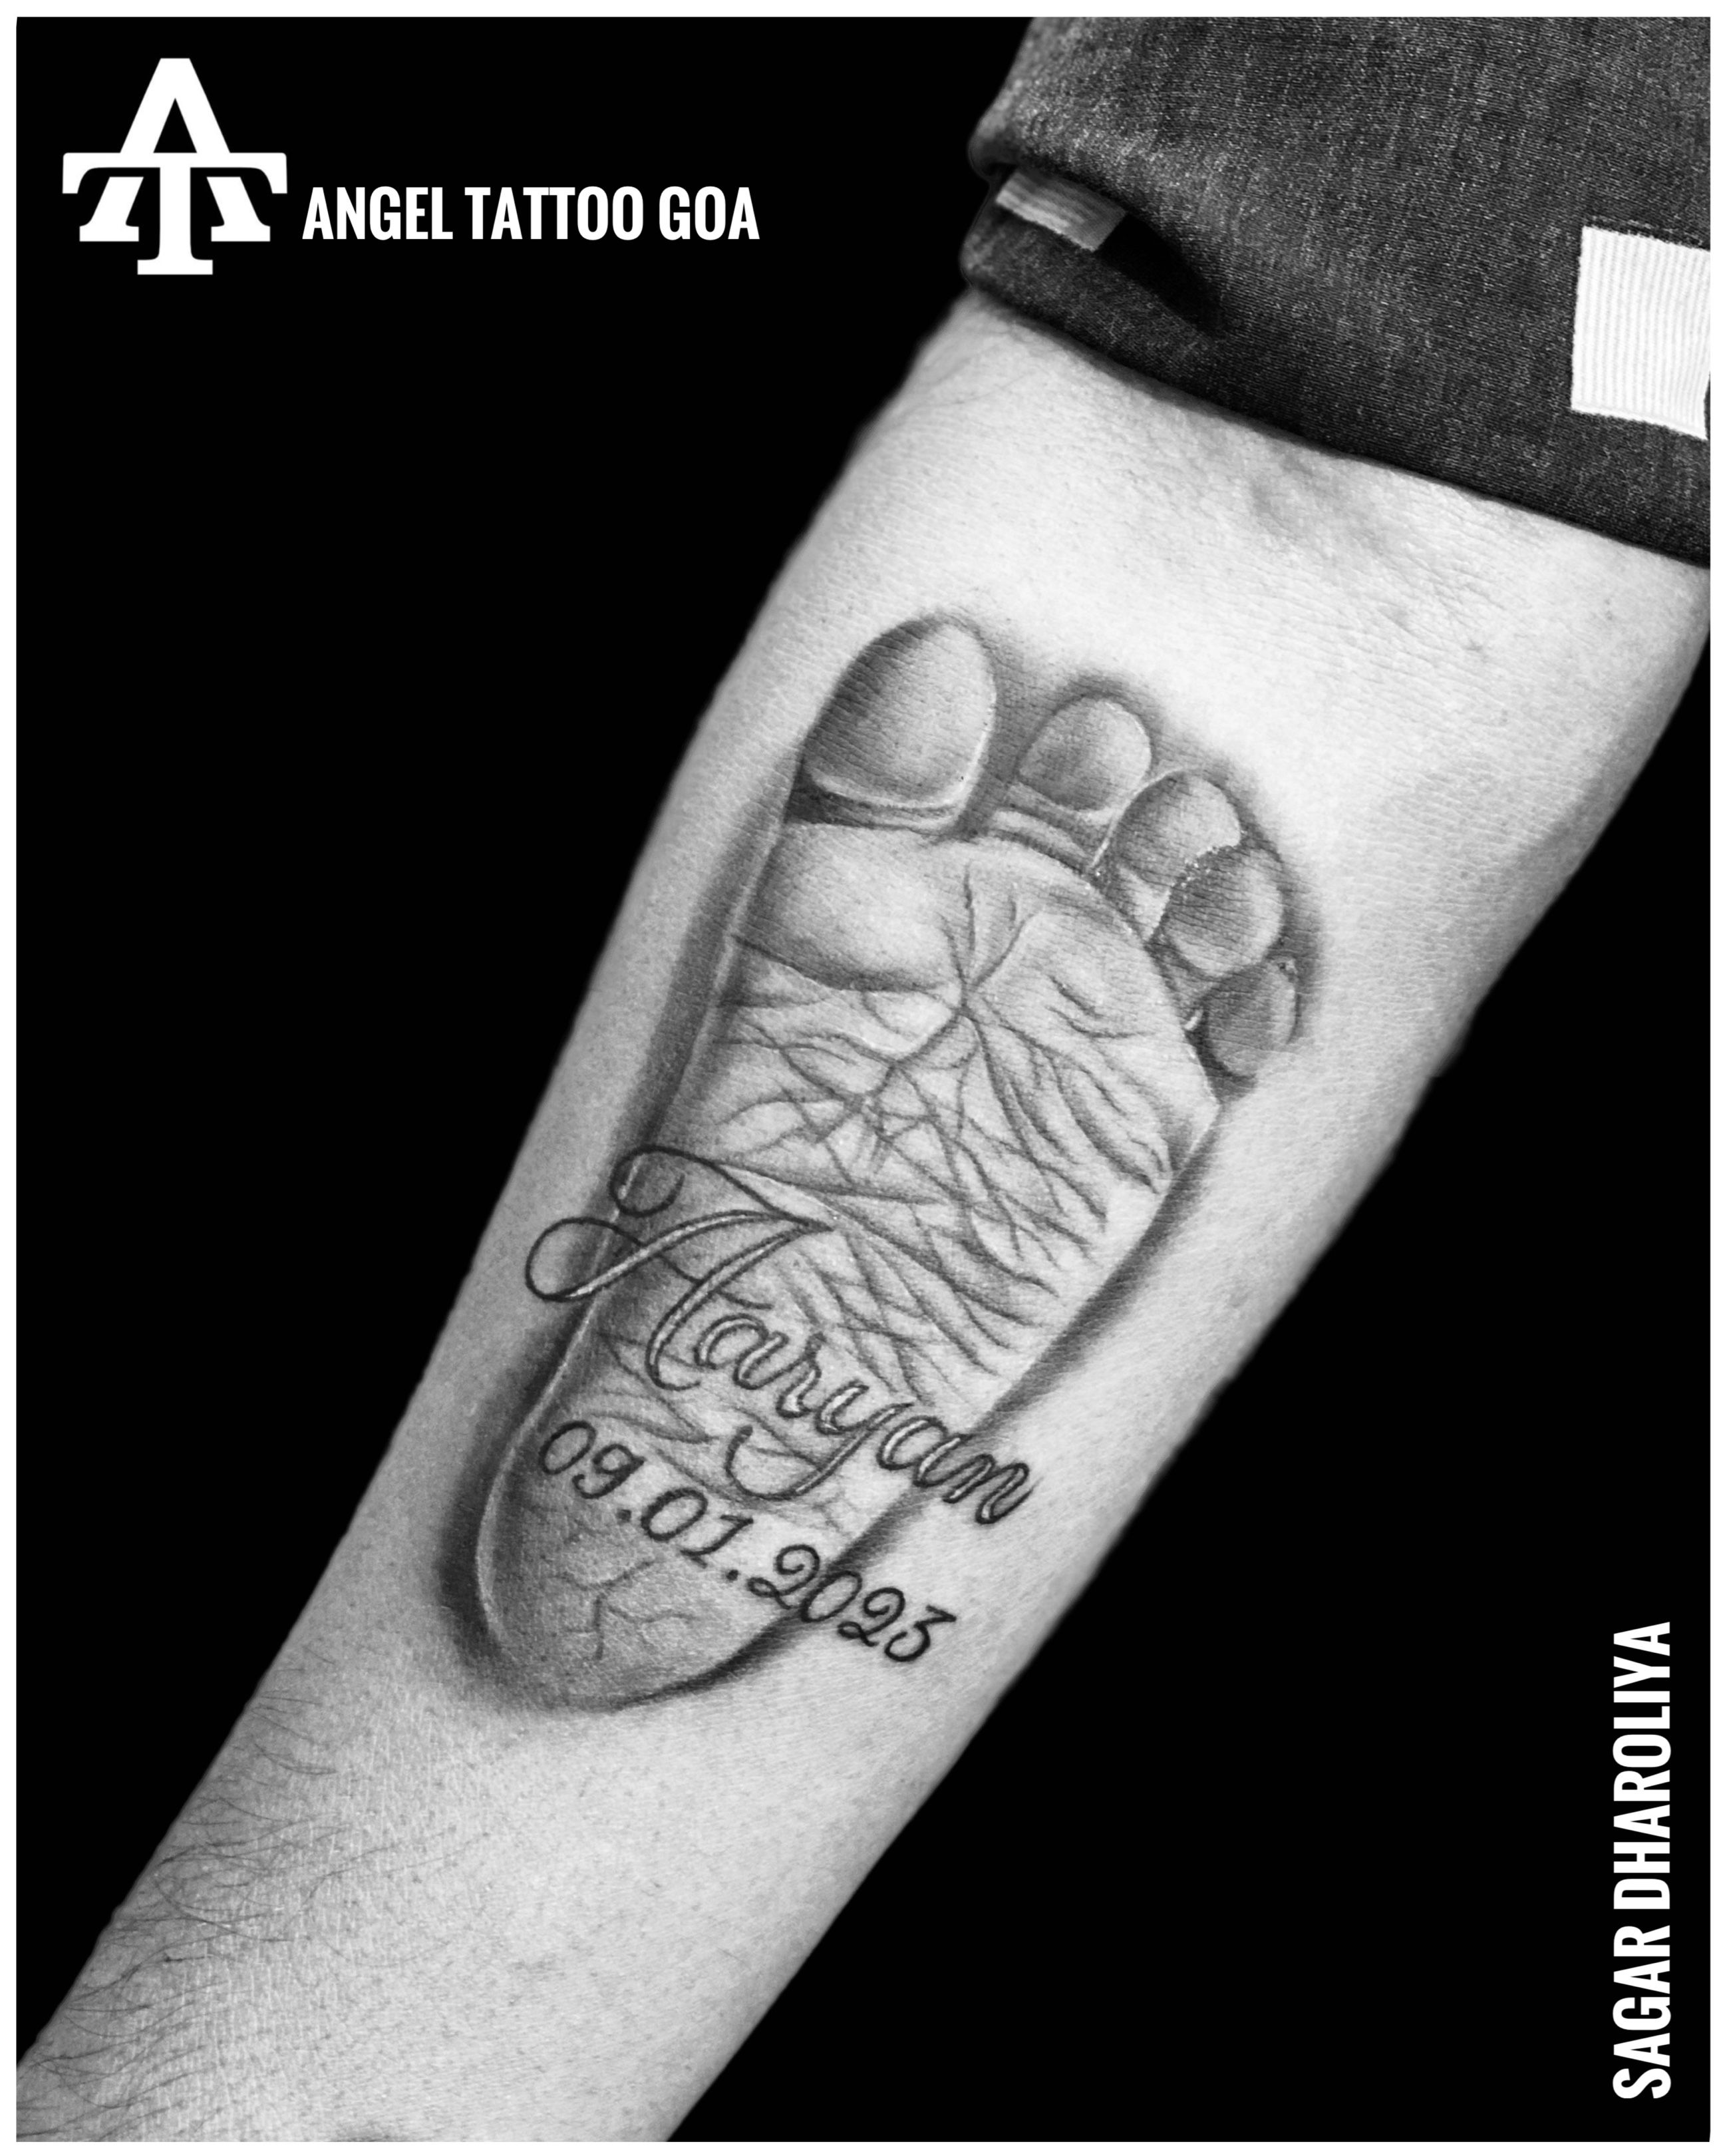 Tattoo uploaded by Angel Tattoo Goa - Best Tattoo Artist in Goa • Anchor  With Compass Tattoo By Mahendra Dharoliya At Angel Tattoo Goa, Best Tattoo  Artist in Goa, Best Tattoo Studio